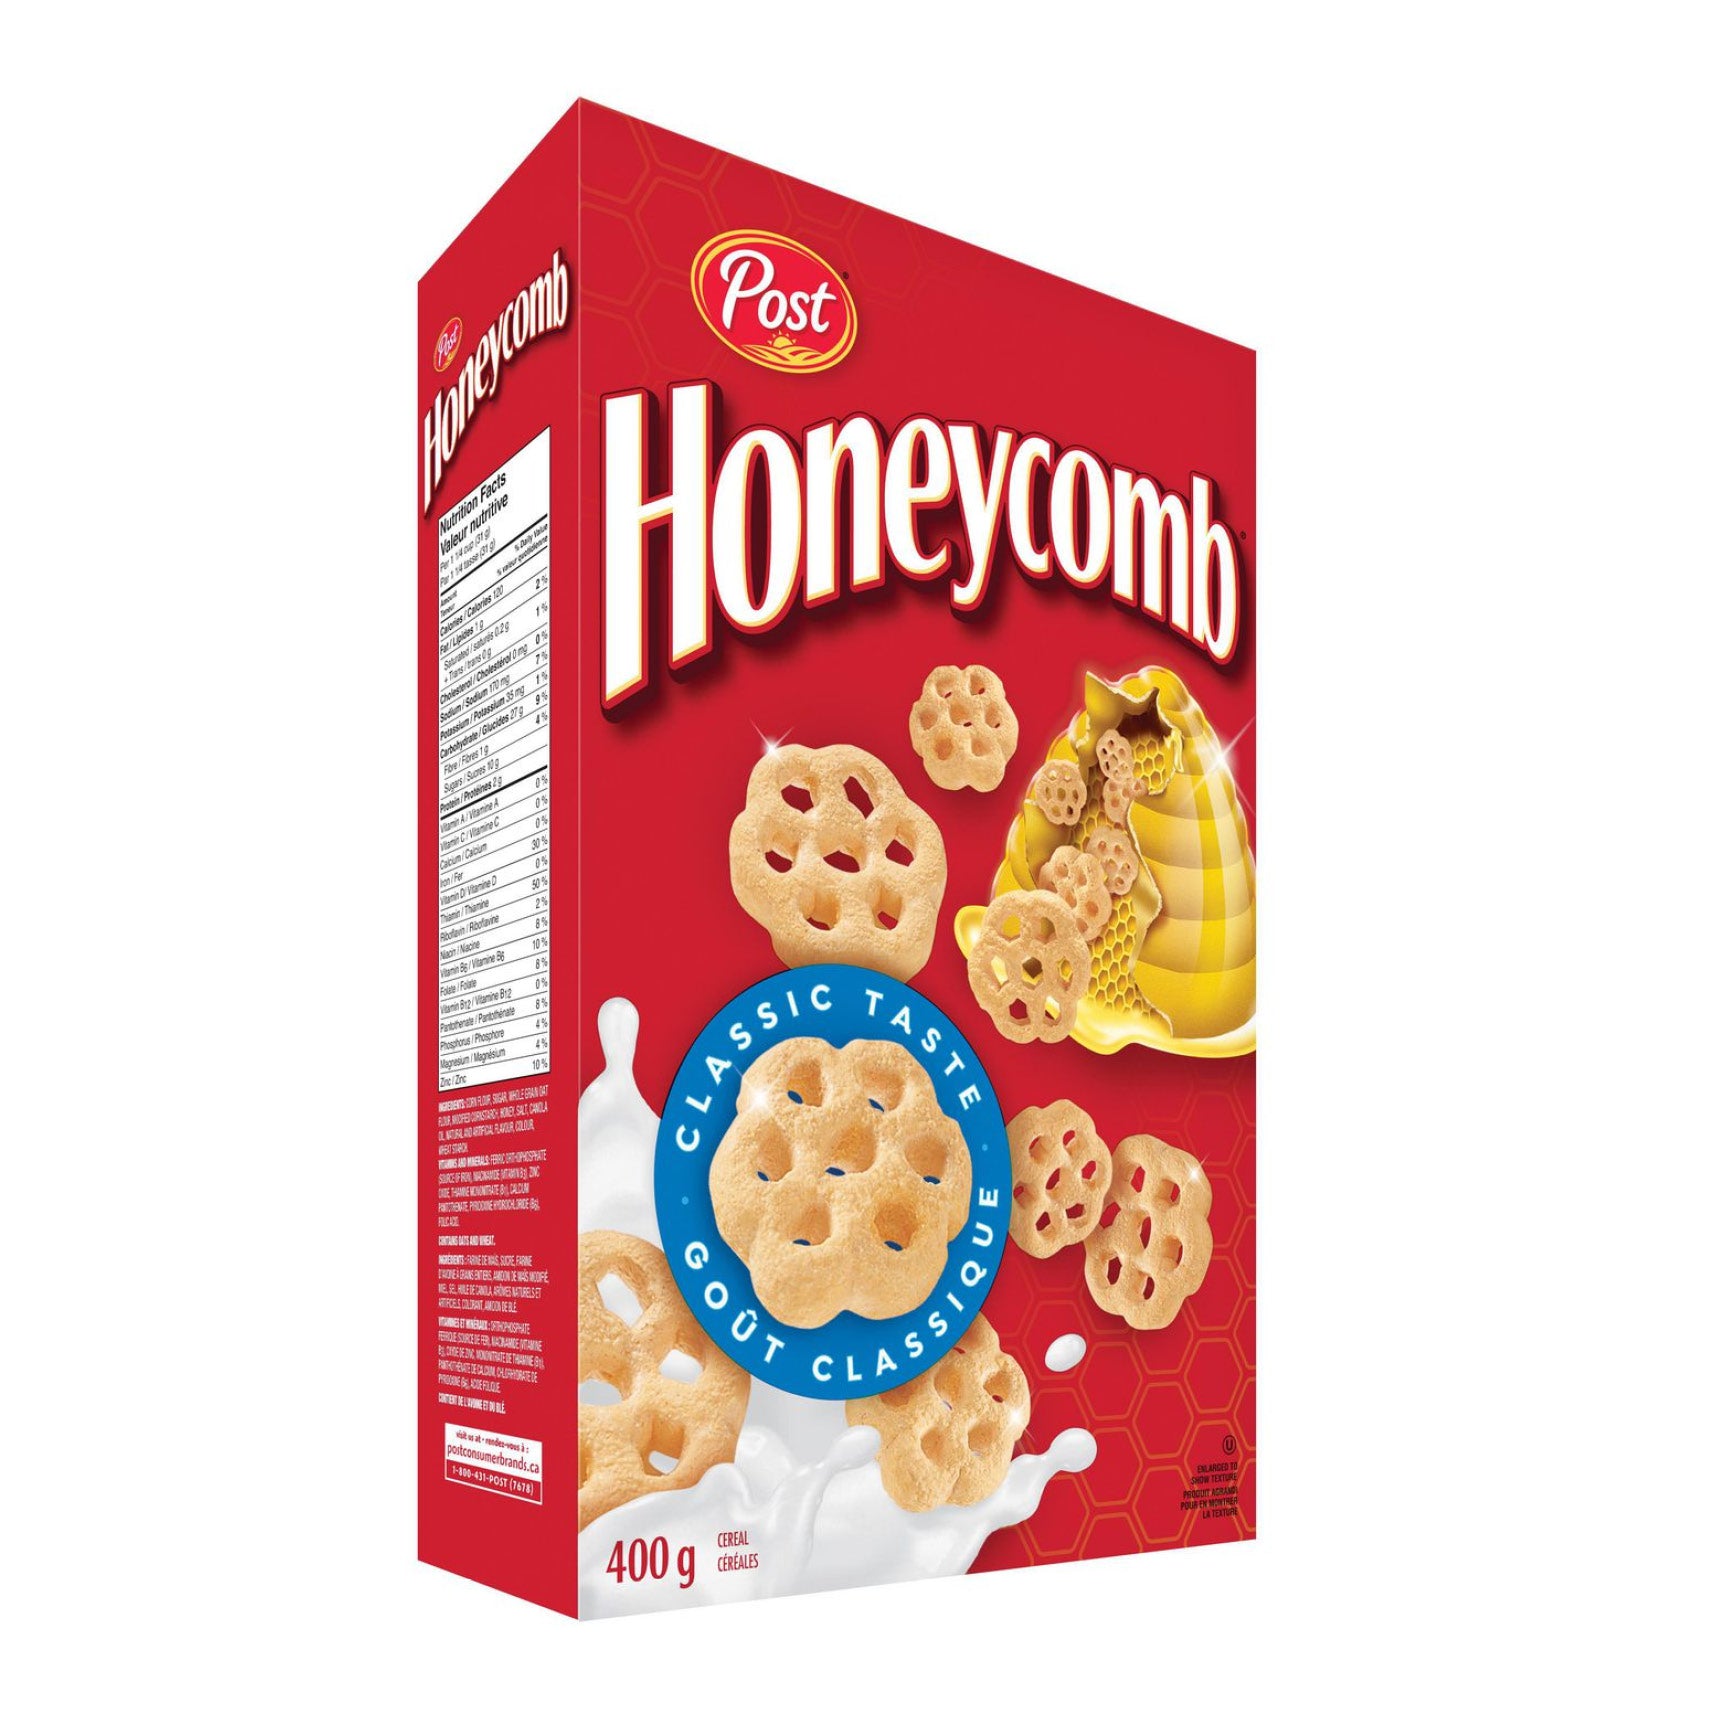 Post Honeycomb Cereal, 400g